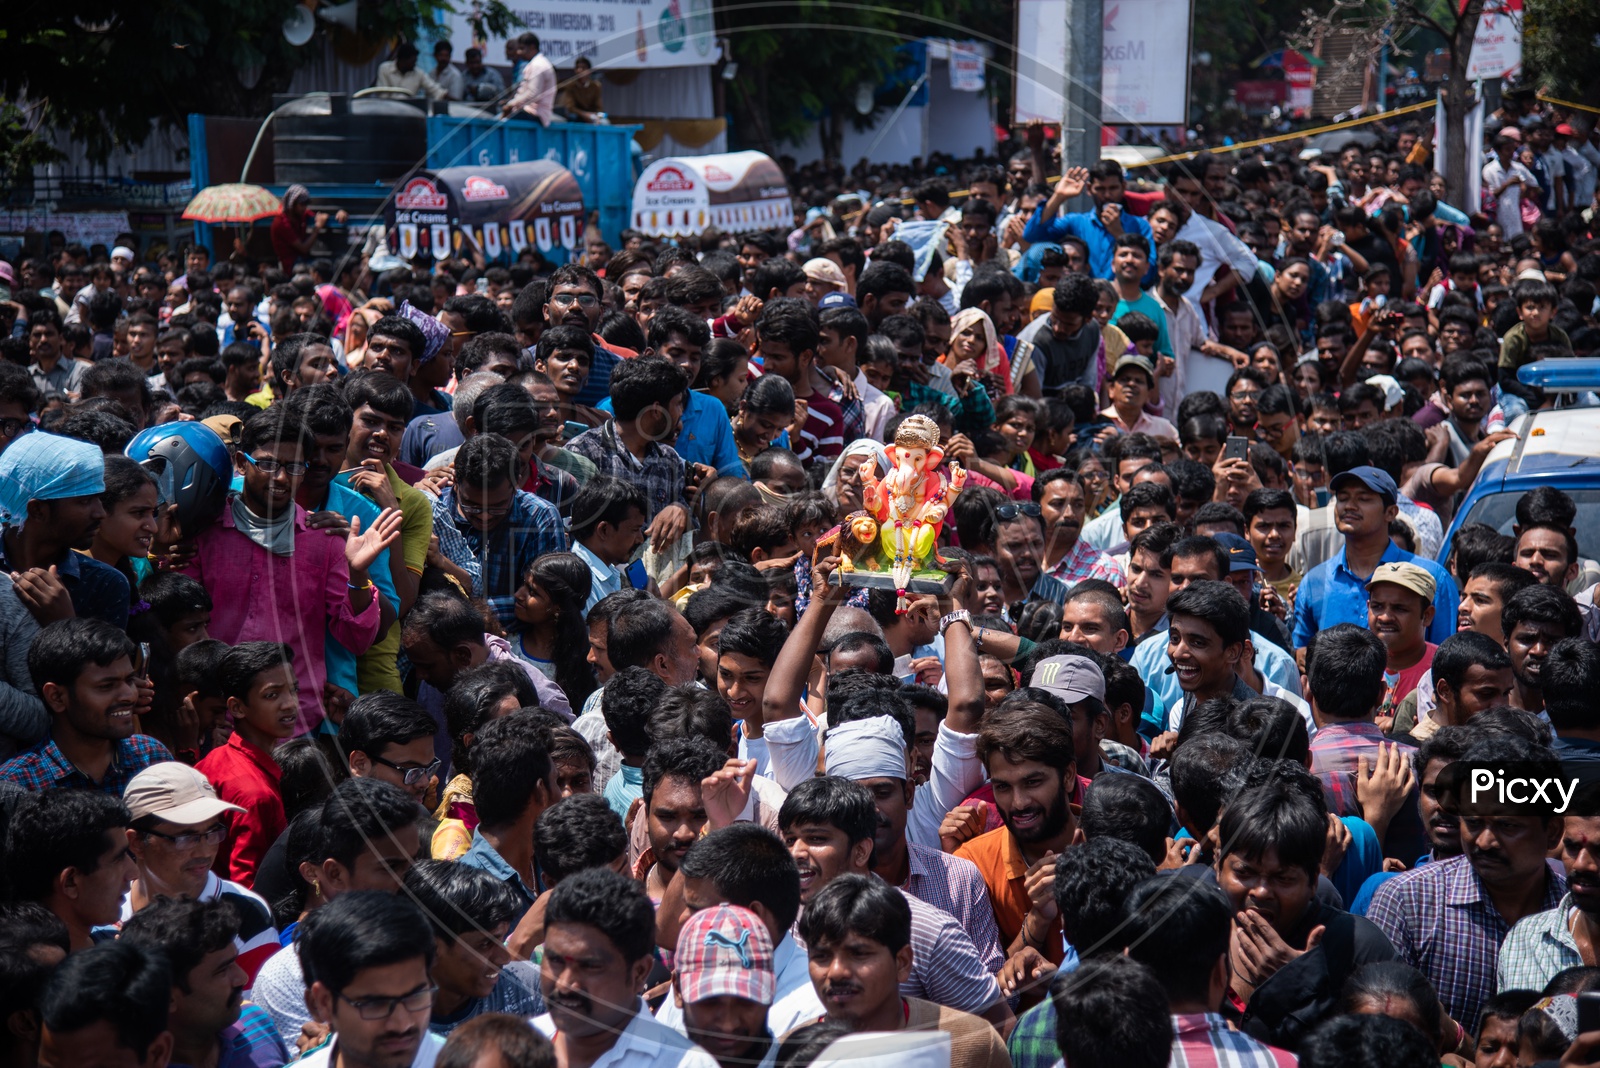 A small ganesh idol being carried by a devotee among humongous crowd